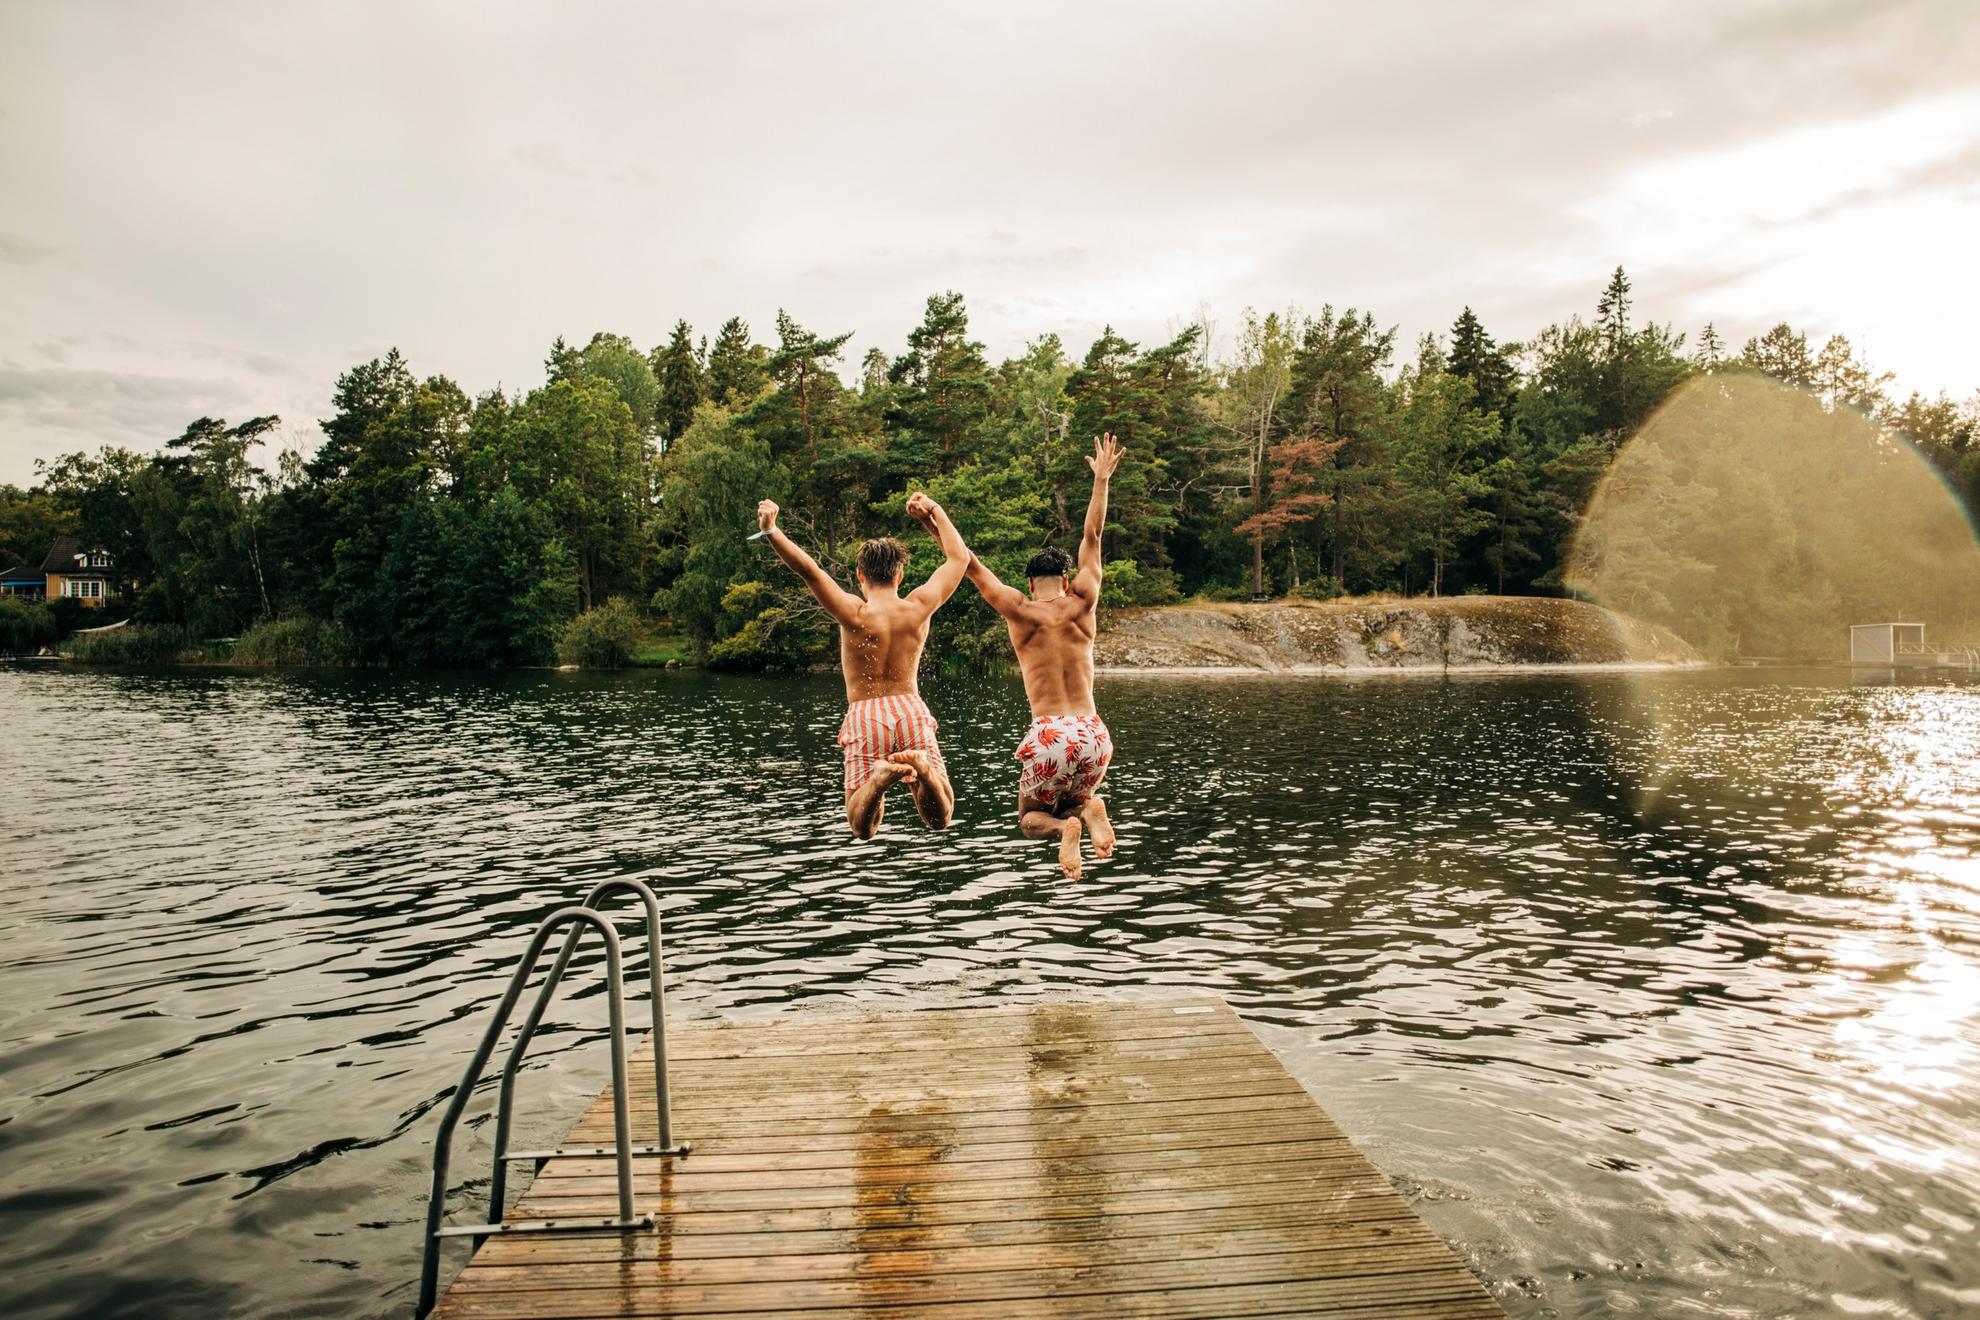 Two men are jumping off a jetty into a lake.